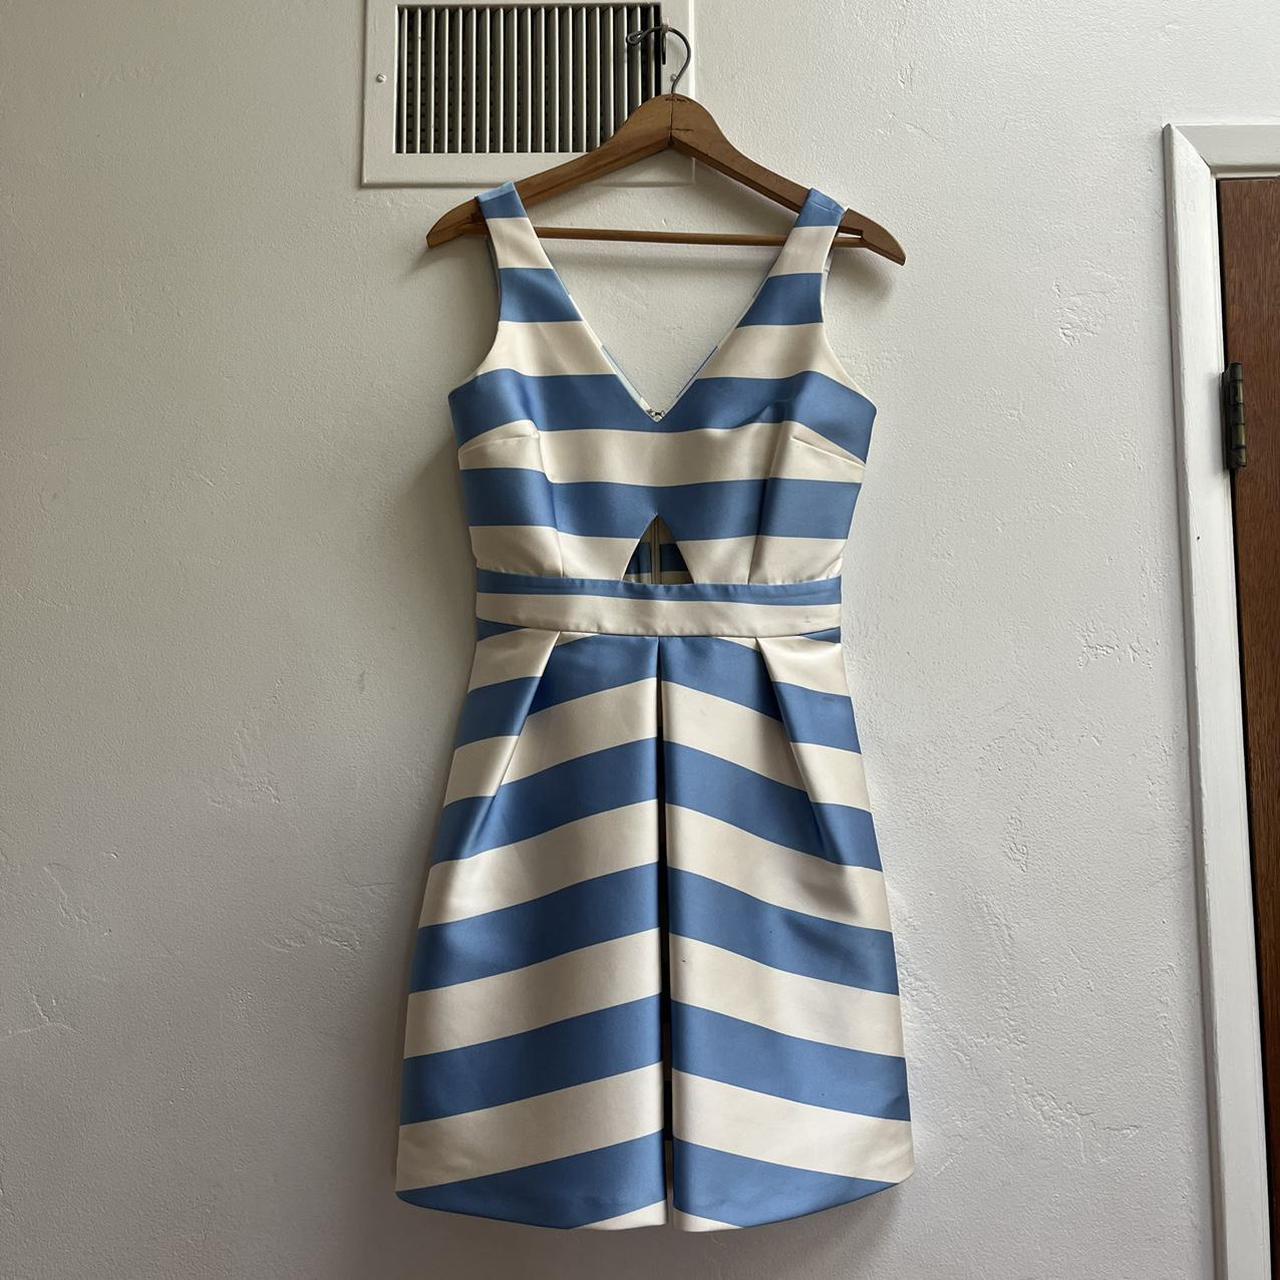 Topshop Women's Blue and White Dress